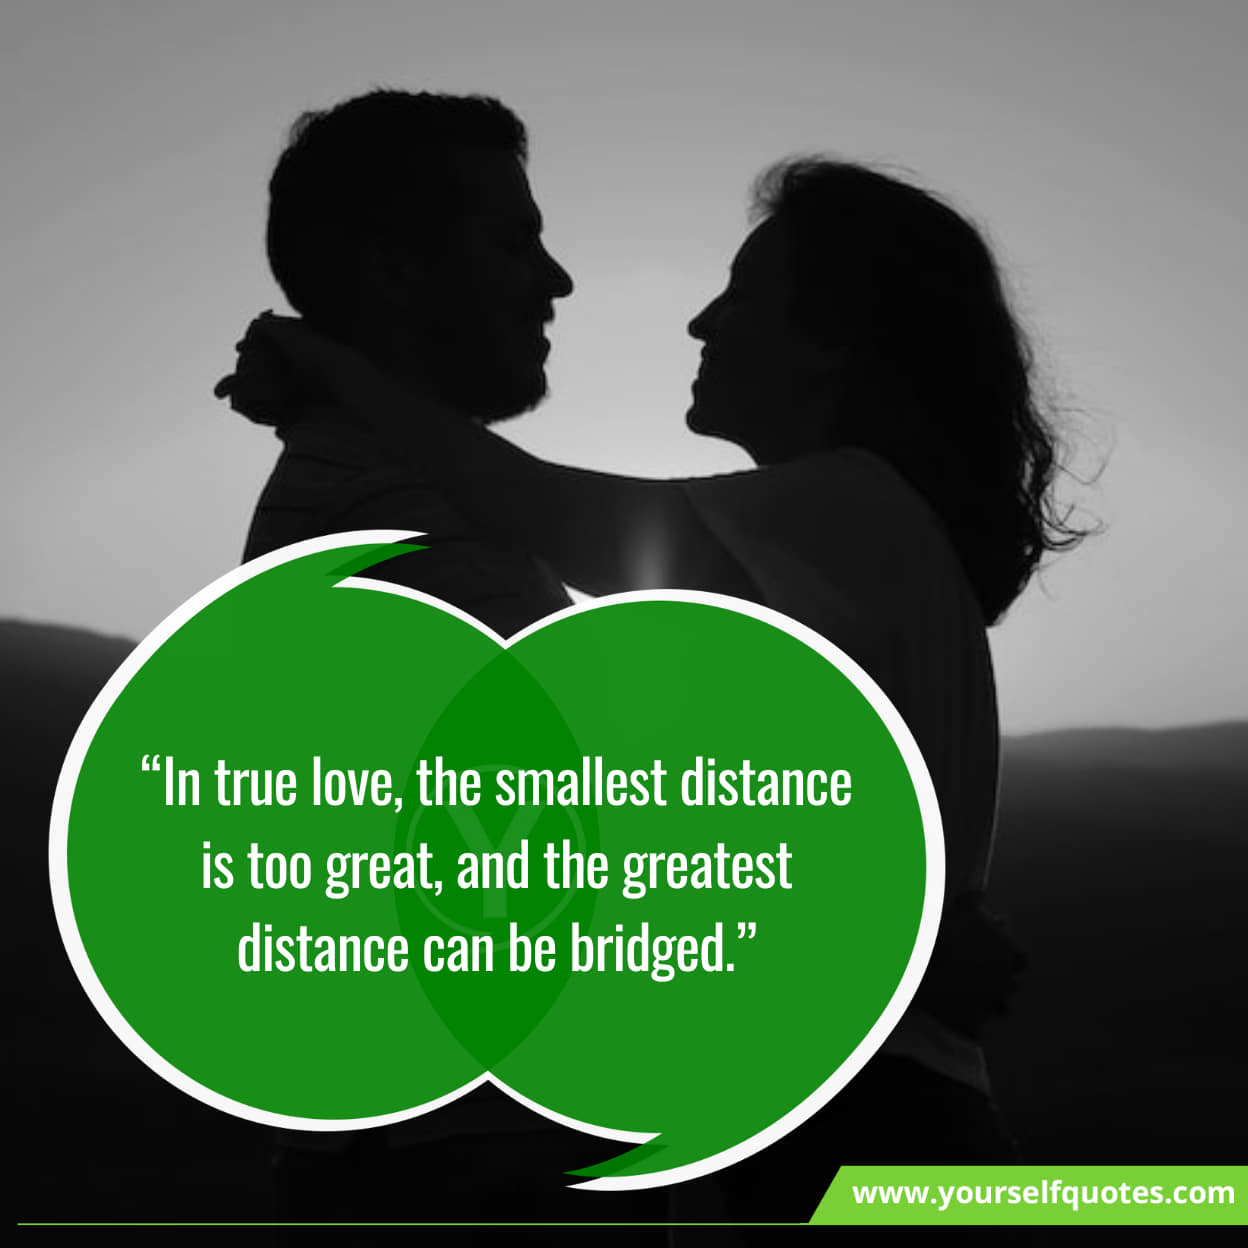 Encouraging Long-Distance Relationship Quotes for Her